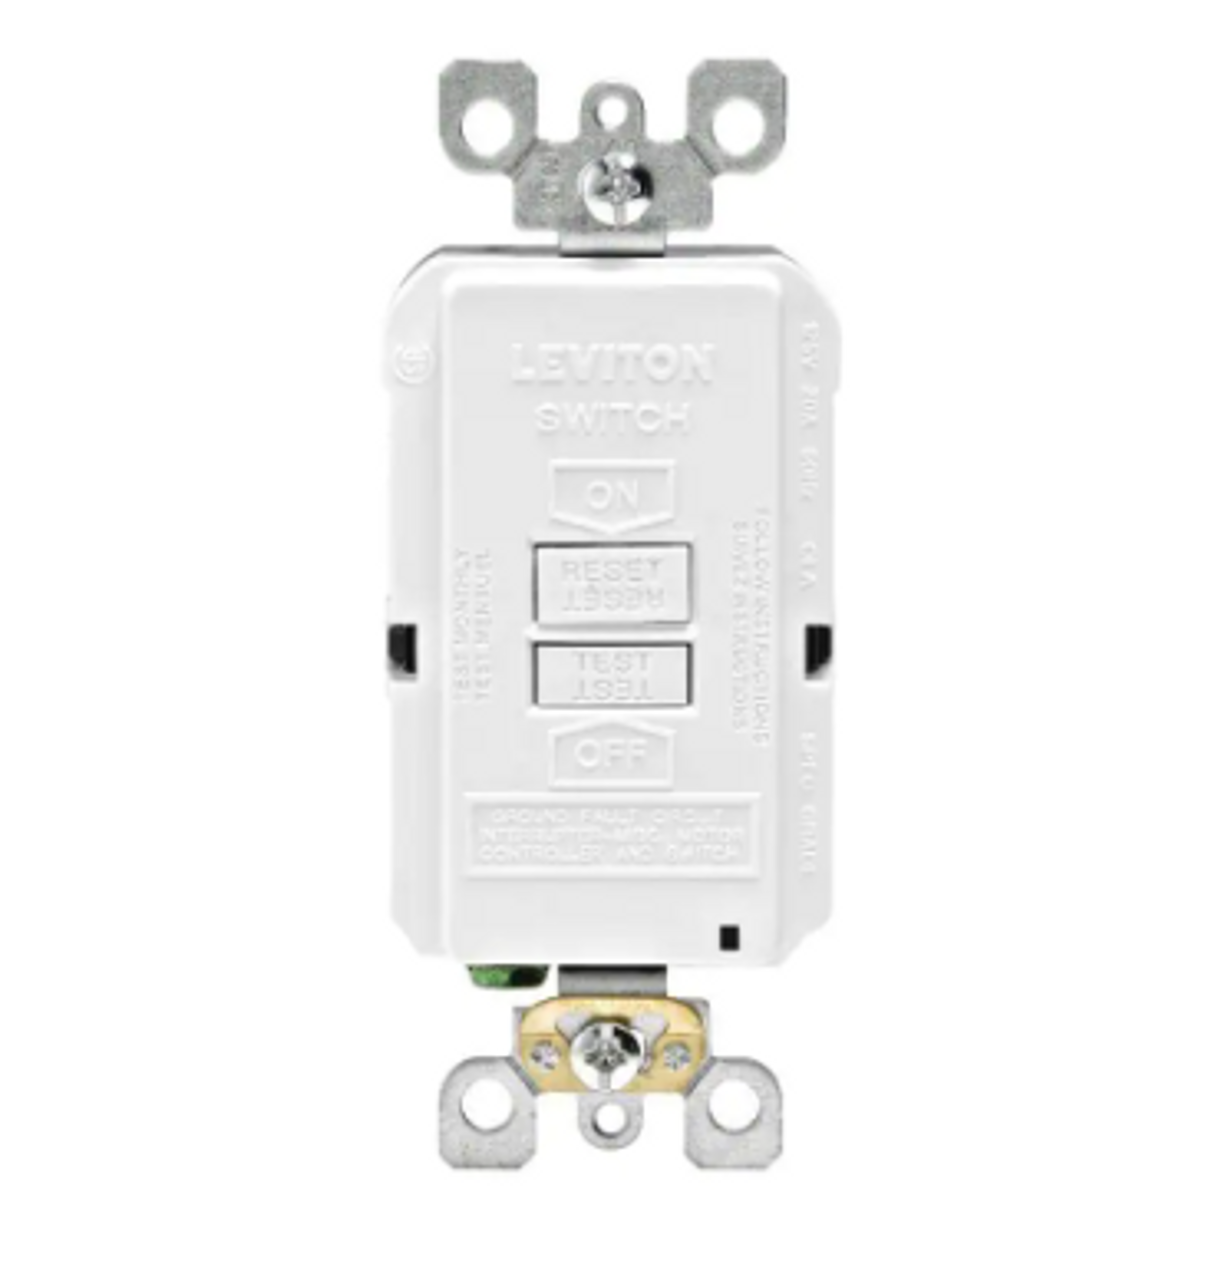 Leviton GFRBF-0KW 20 Amp 125-Volt Combo Self-Test Blank Face GFCI Outlet, White (2-Pack)